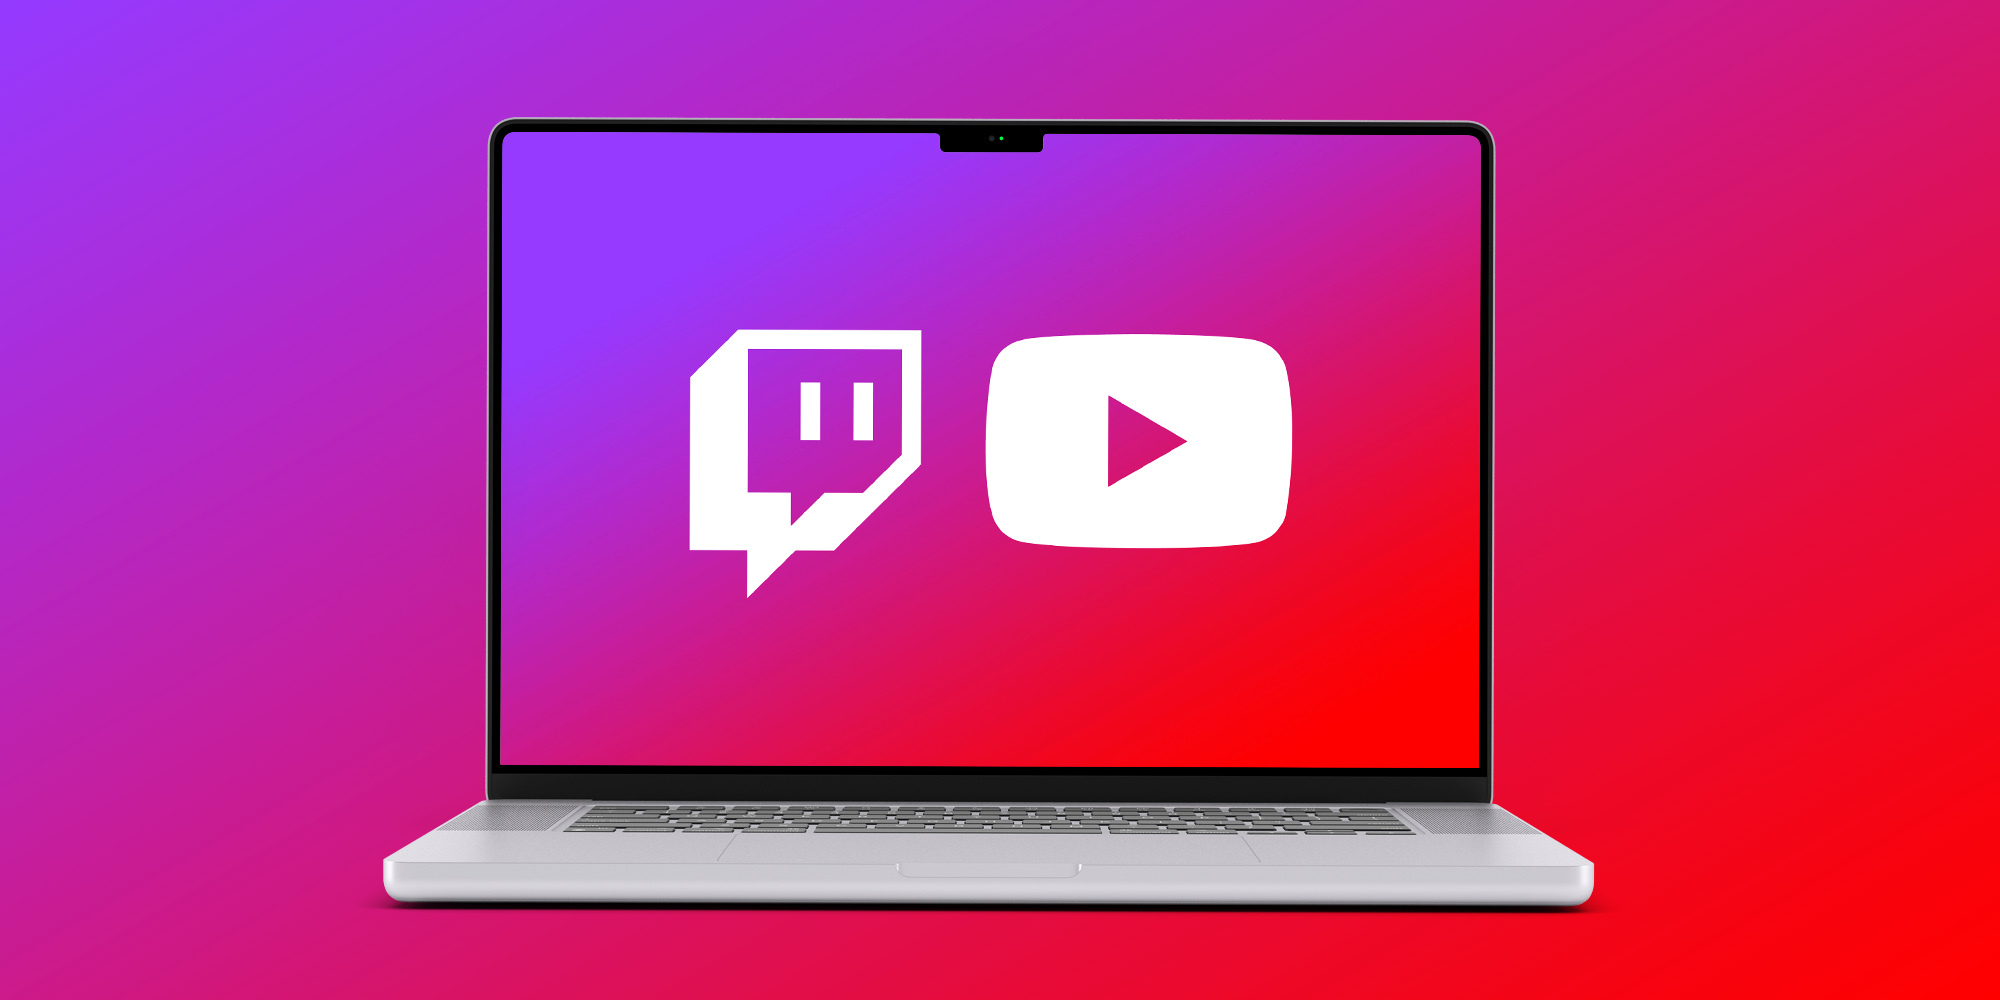 Its easier than you think to live stream from a Mac